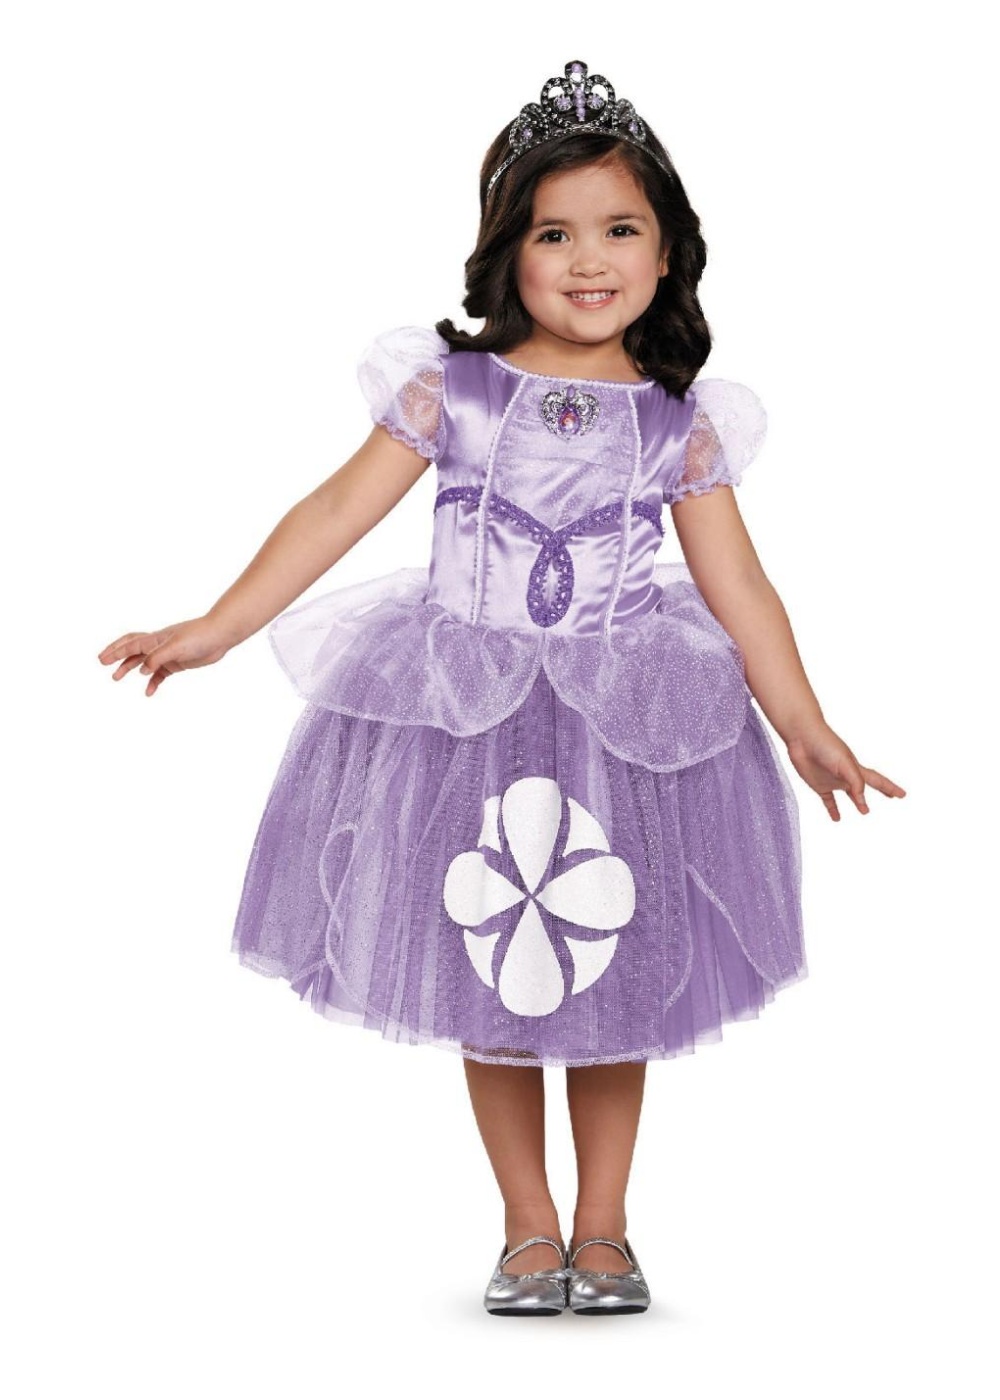 Sofia the First Toddler Girls Costume - Princess Costumes